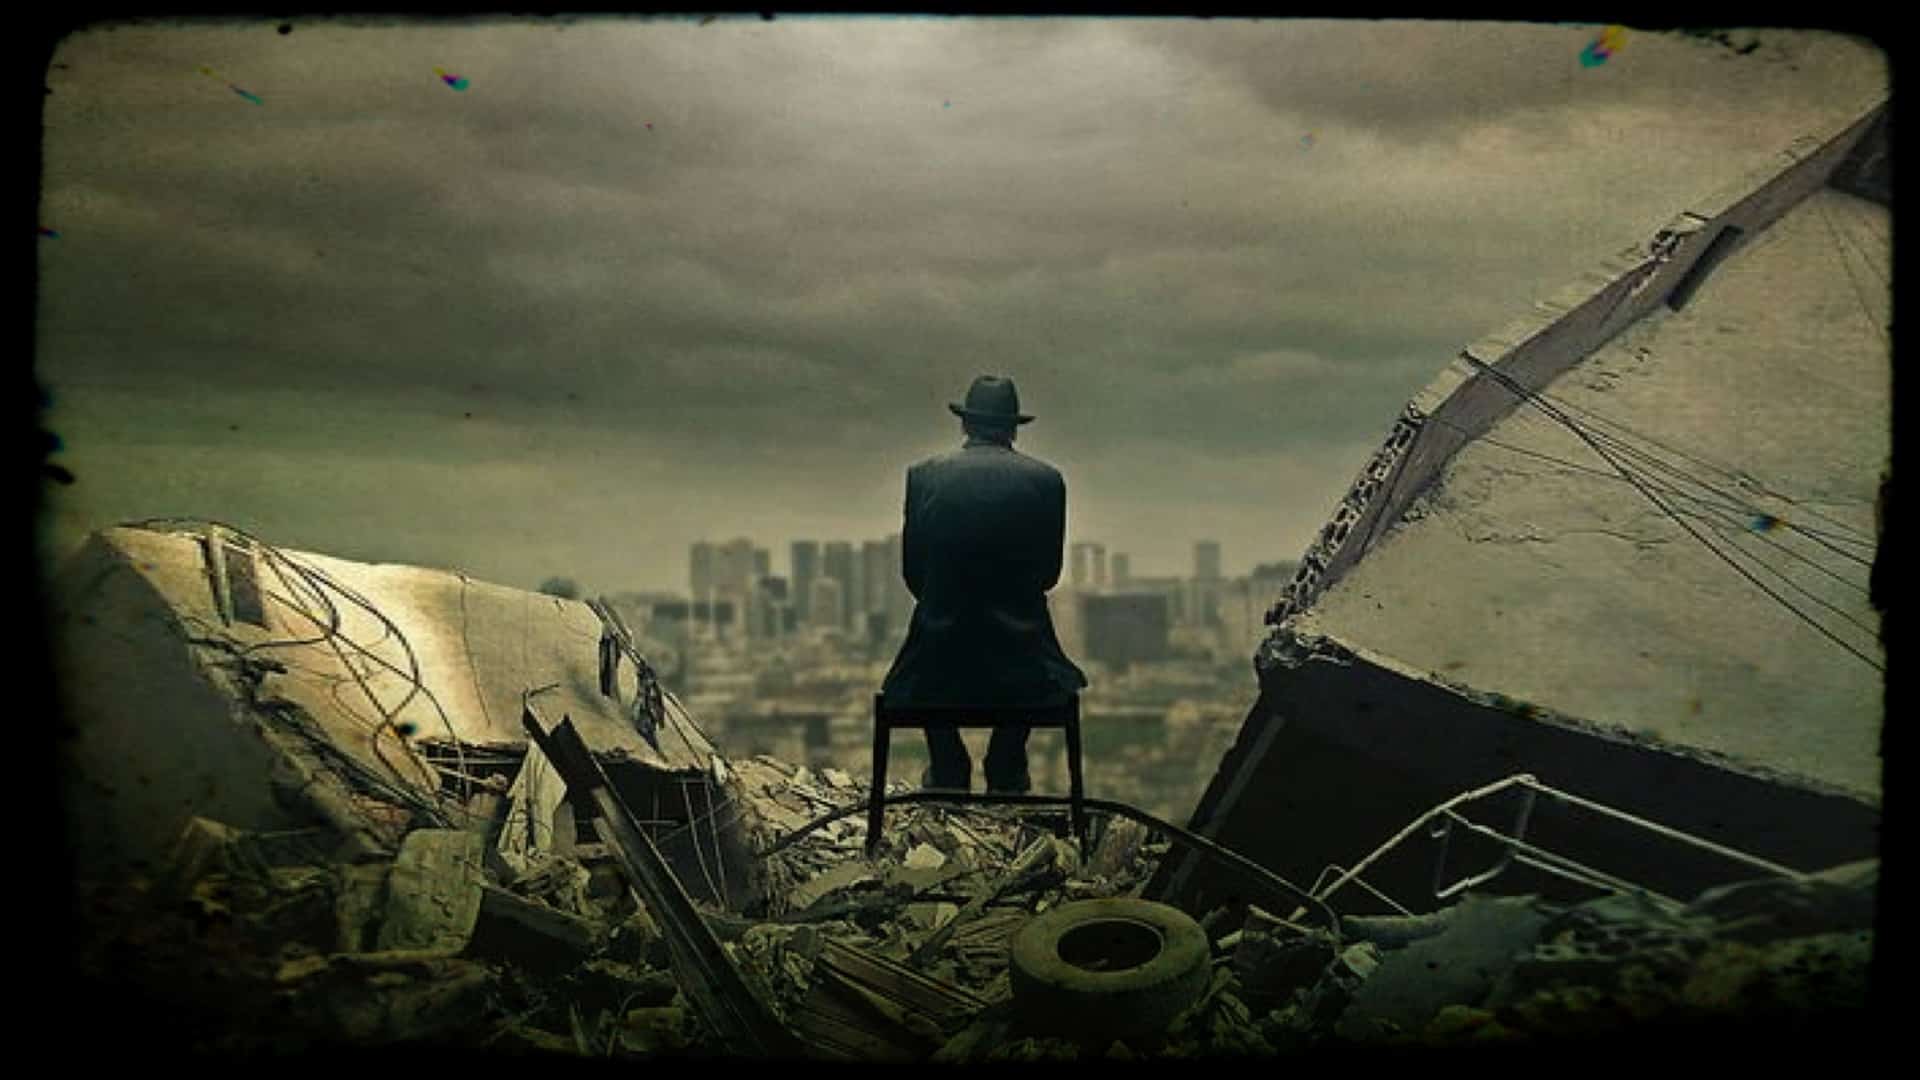 A seated figure, their back to the camera is shown under a dark and ominous sky. The figure looks toward a city skyline in the distance. They are surrounded by the rubble of a collapsed building and the discards of modern life.